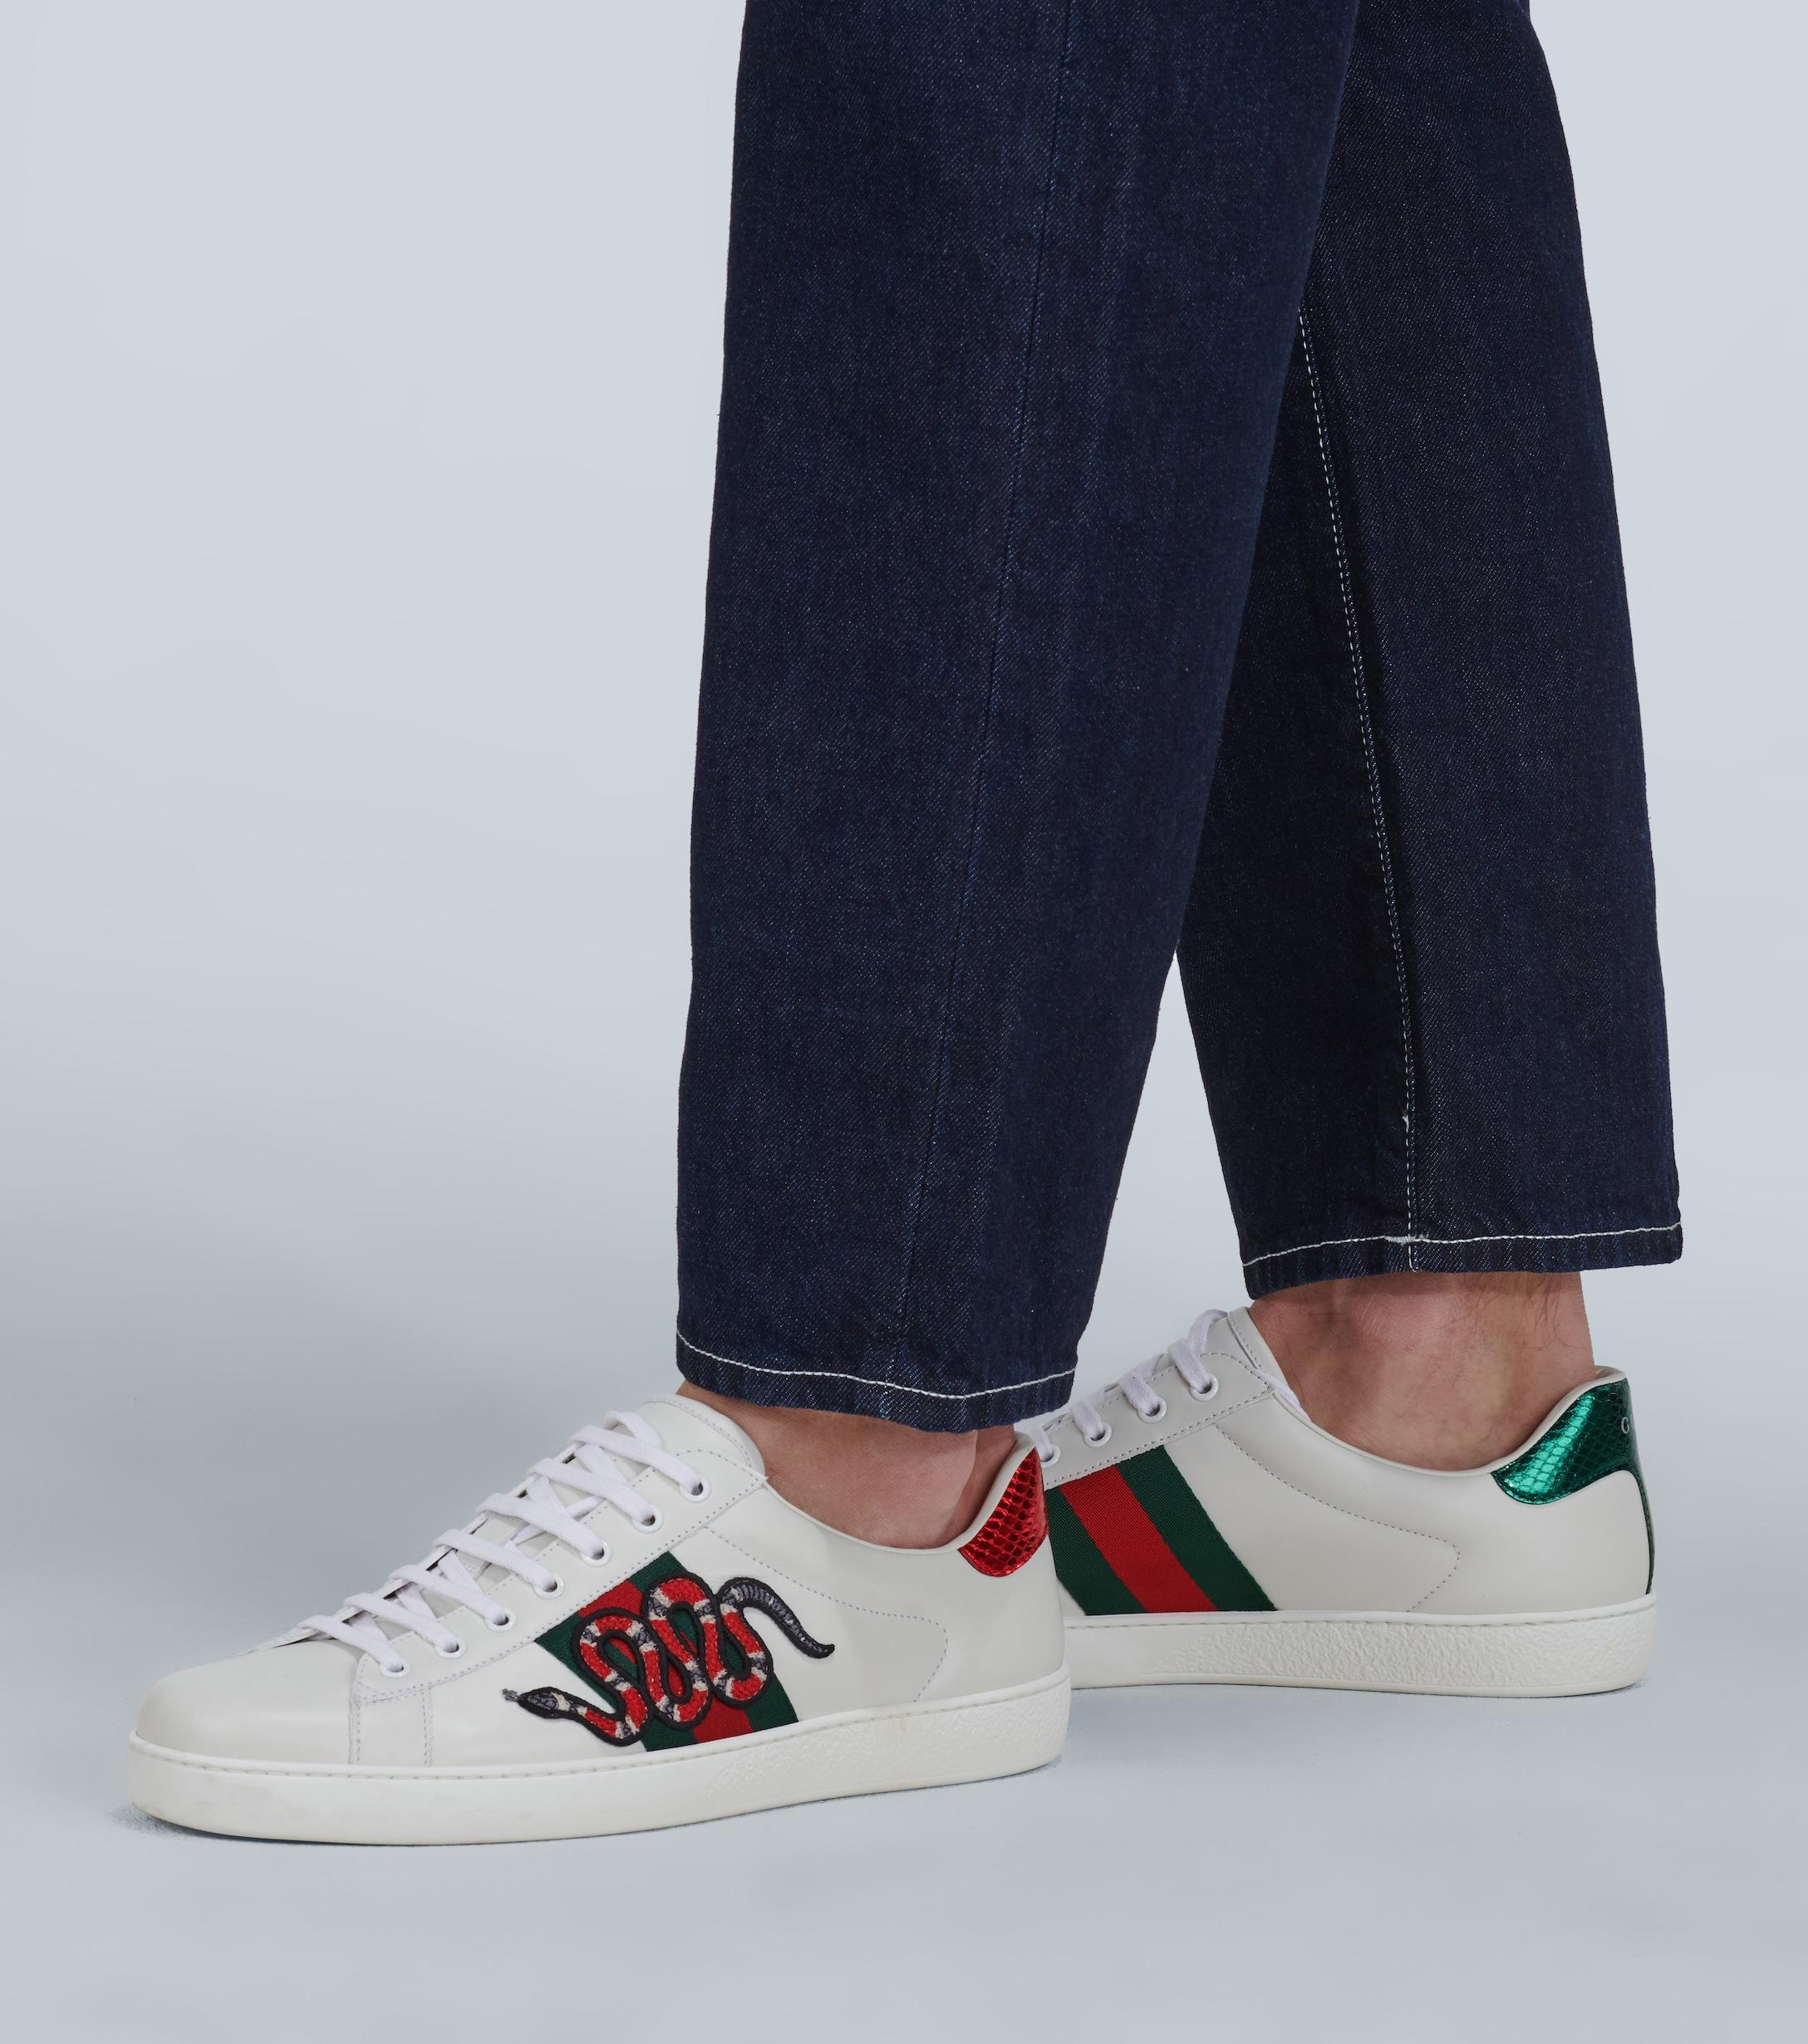 gucci snake shoes white